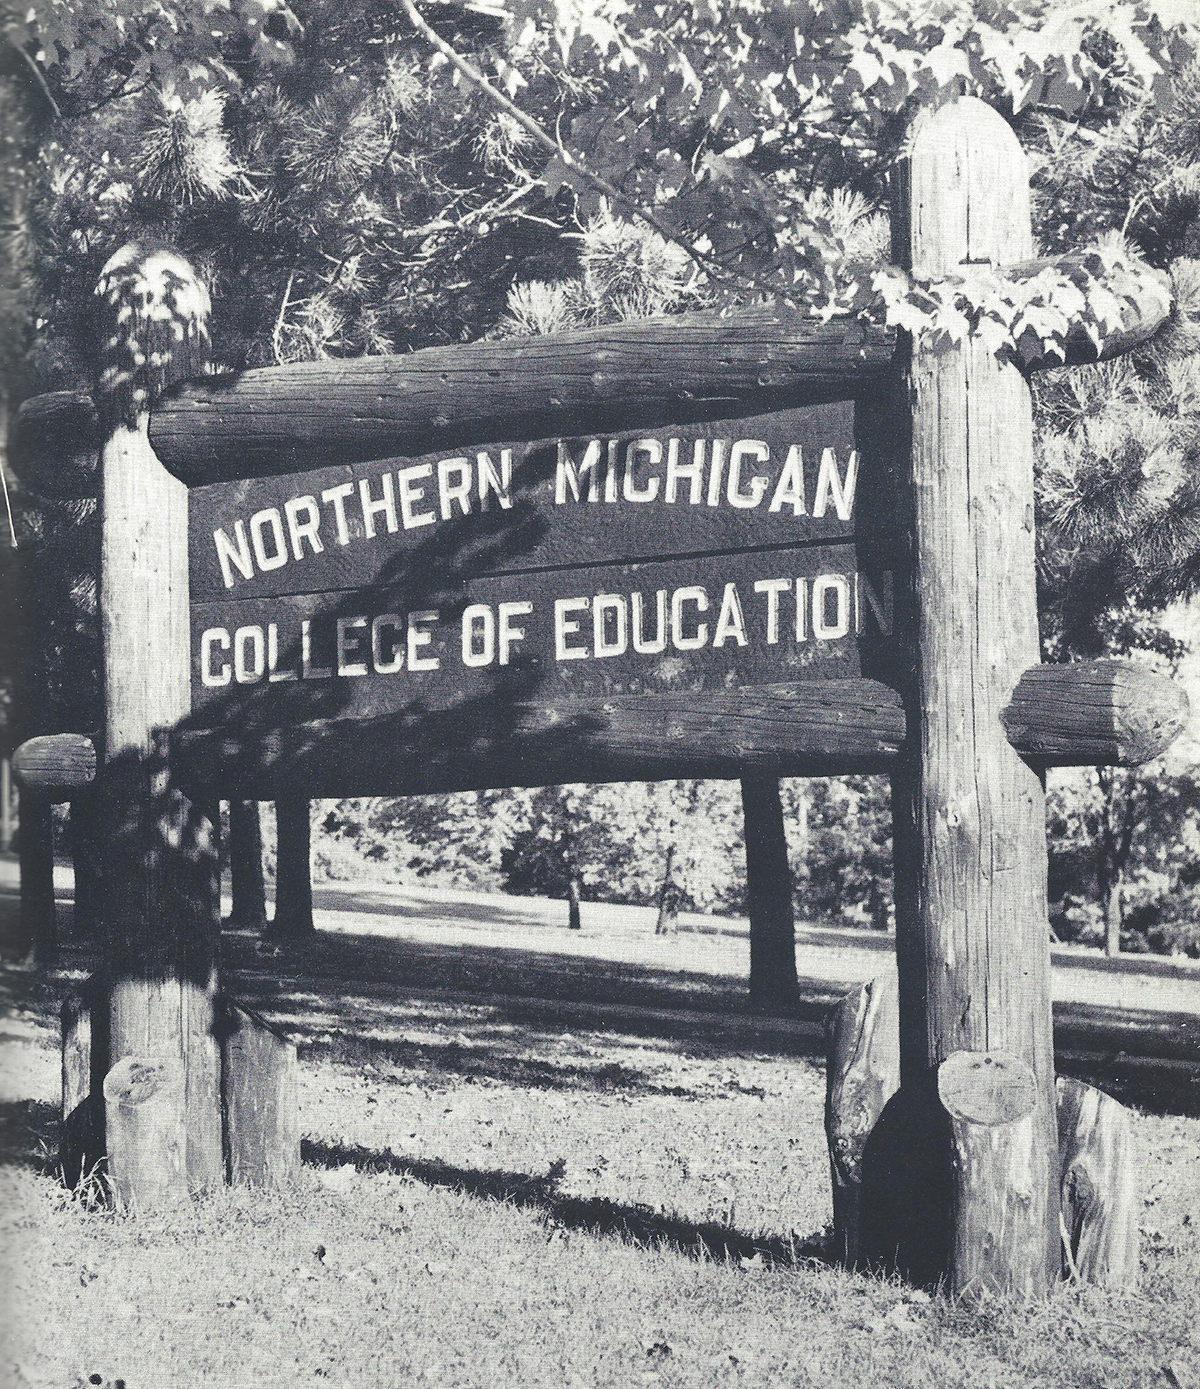 Northern Michigan College of Education sign in 1949